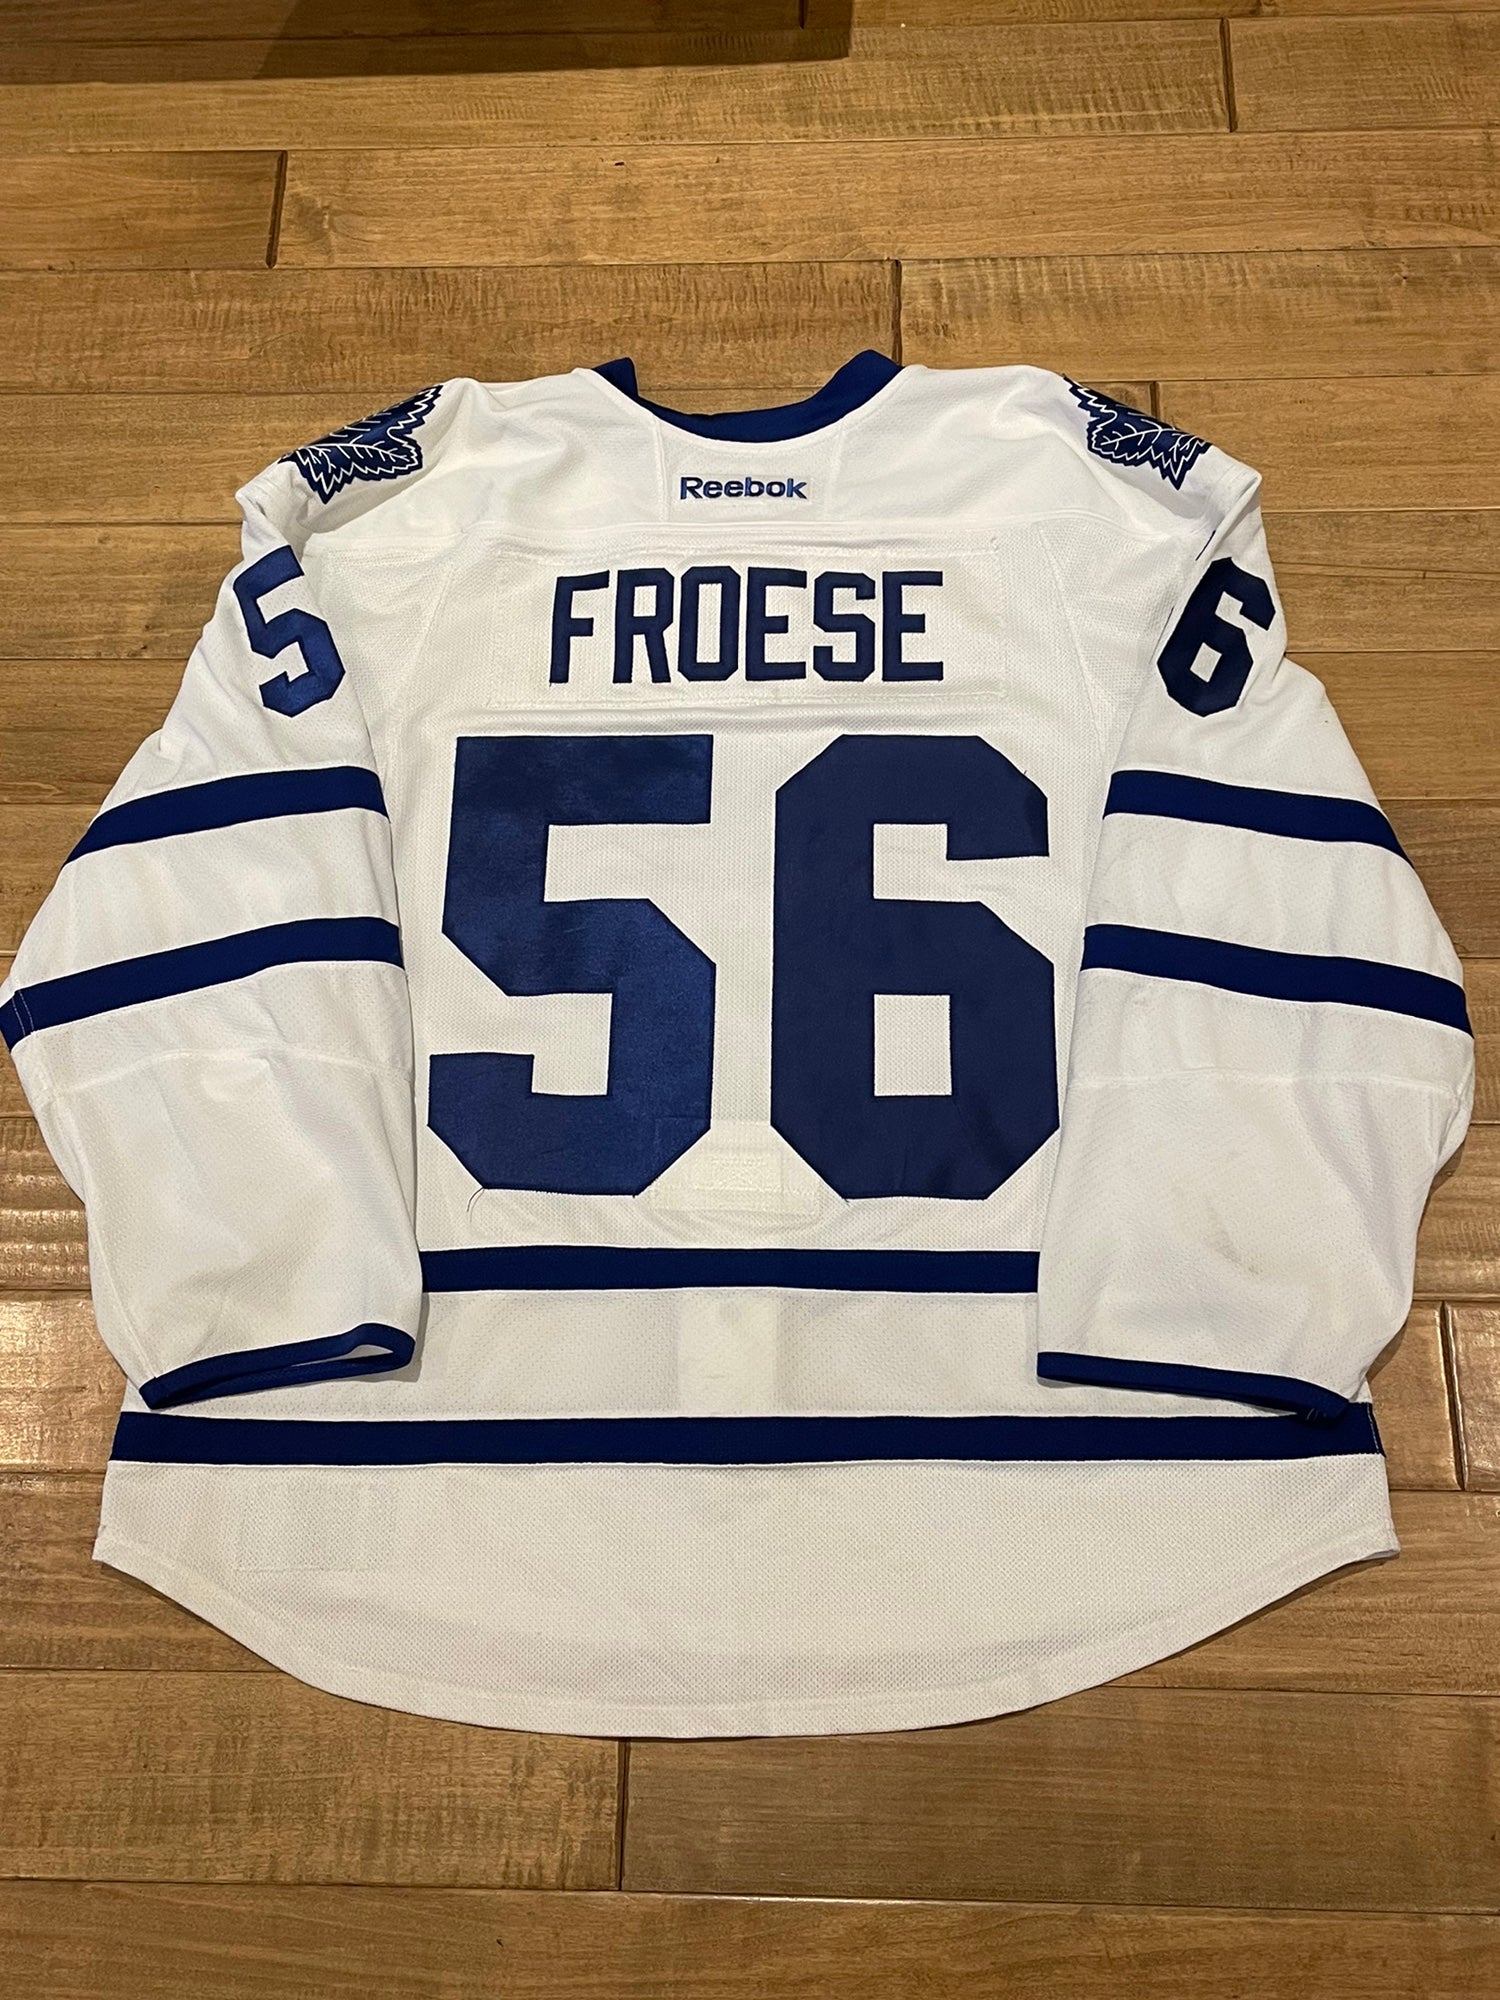 Byron Froese 2015-16 Toronto Maple Leafs Game Used Worn Jersey HHOF Patch  56